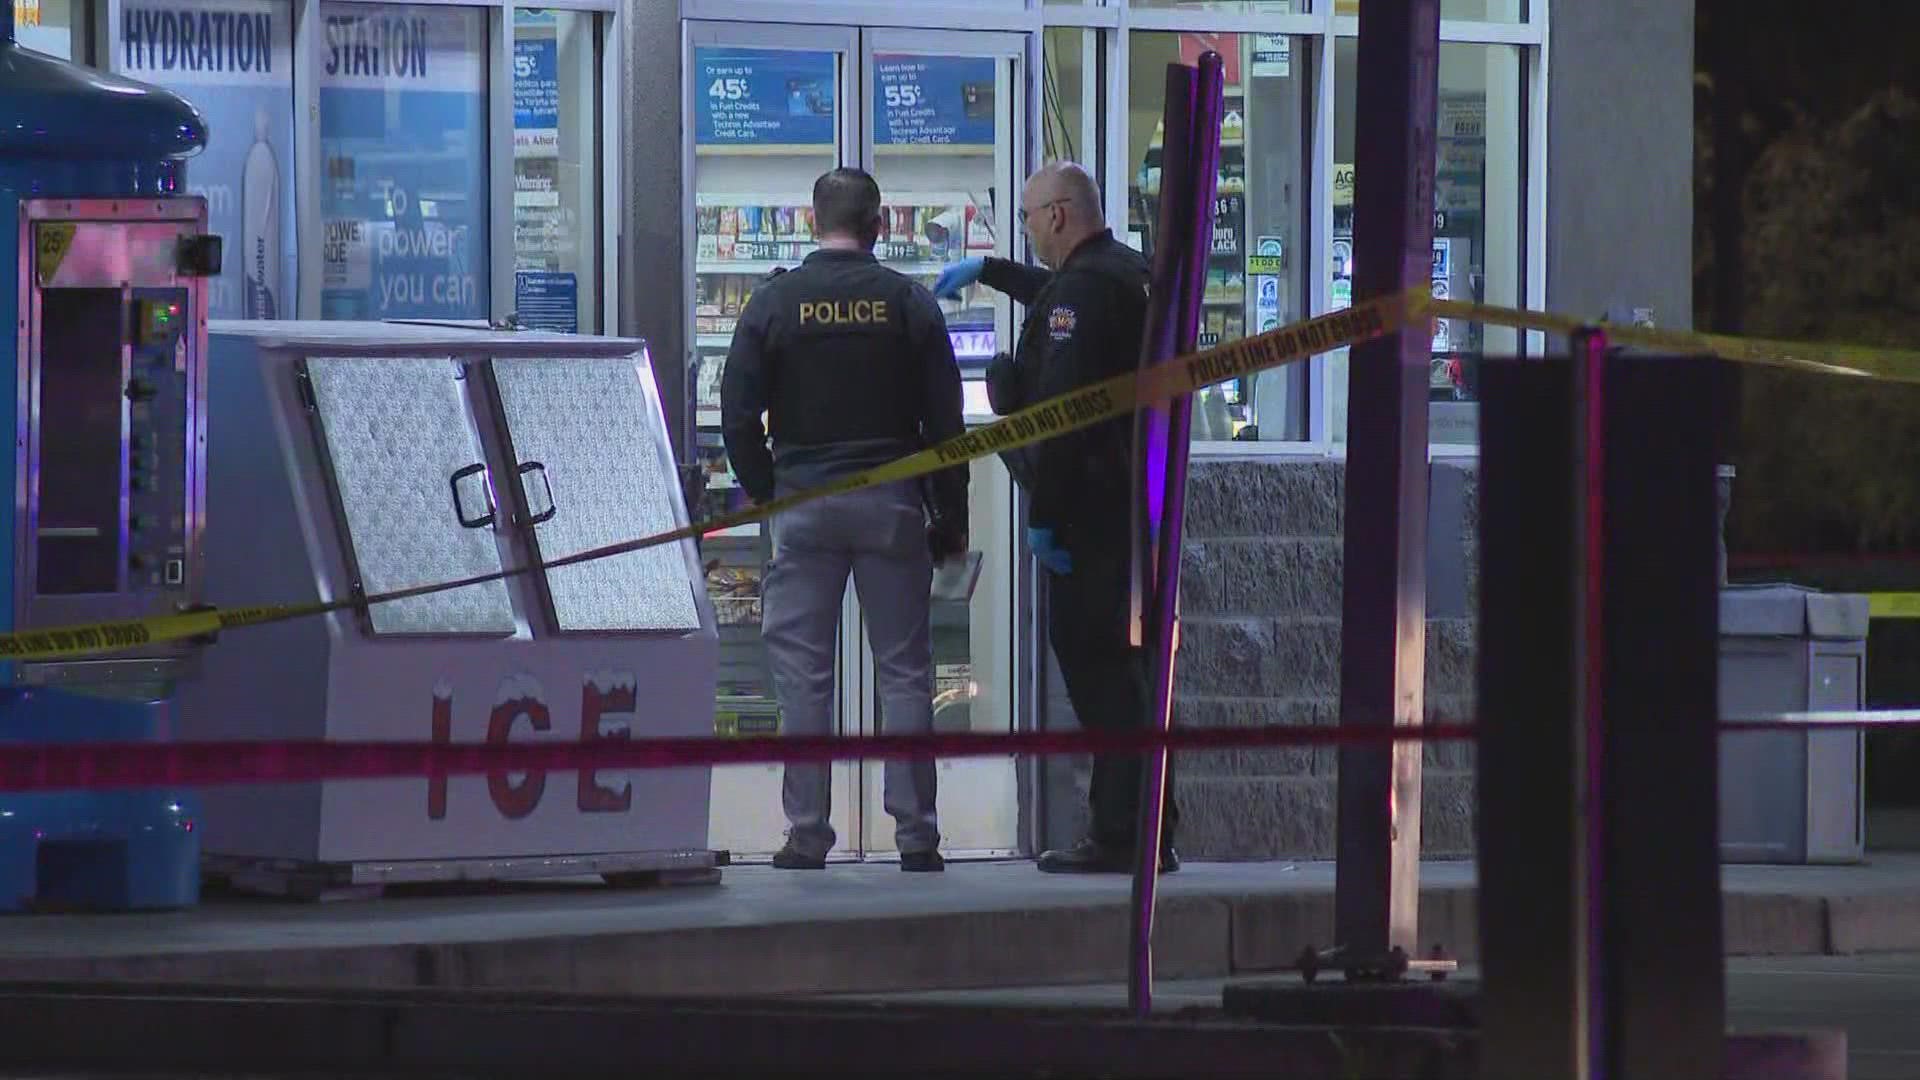 An attempted robbery at an Avondale gas station was stopped in its tracks when the suspect was shot by the employee behind the counter.